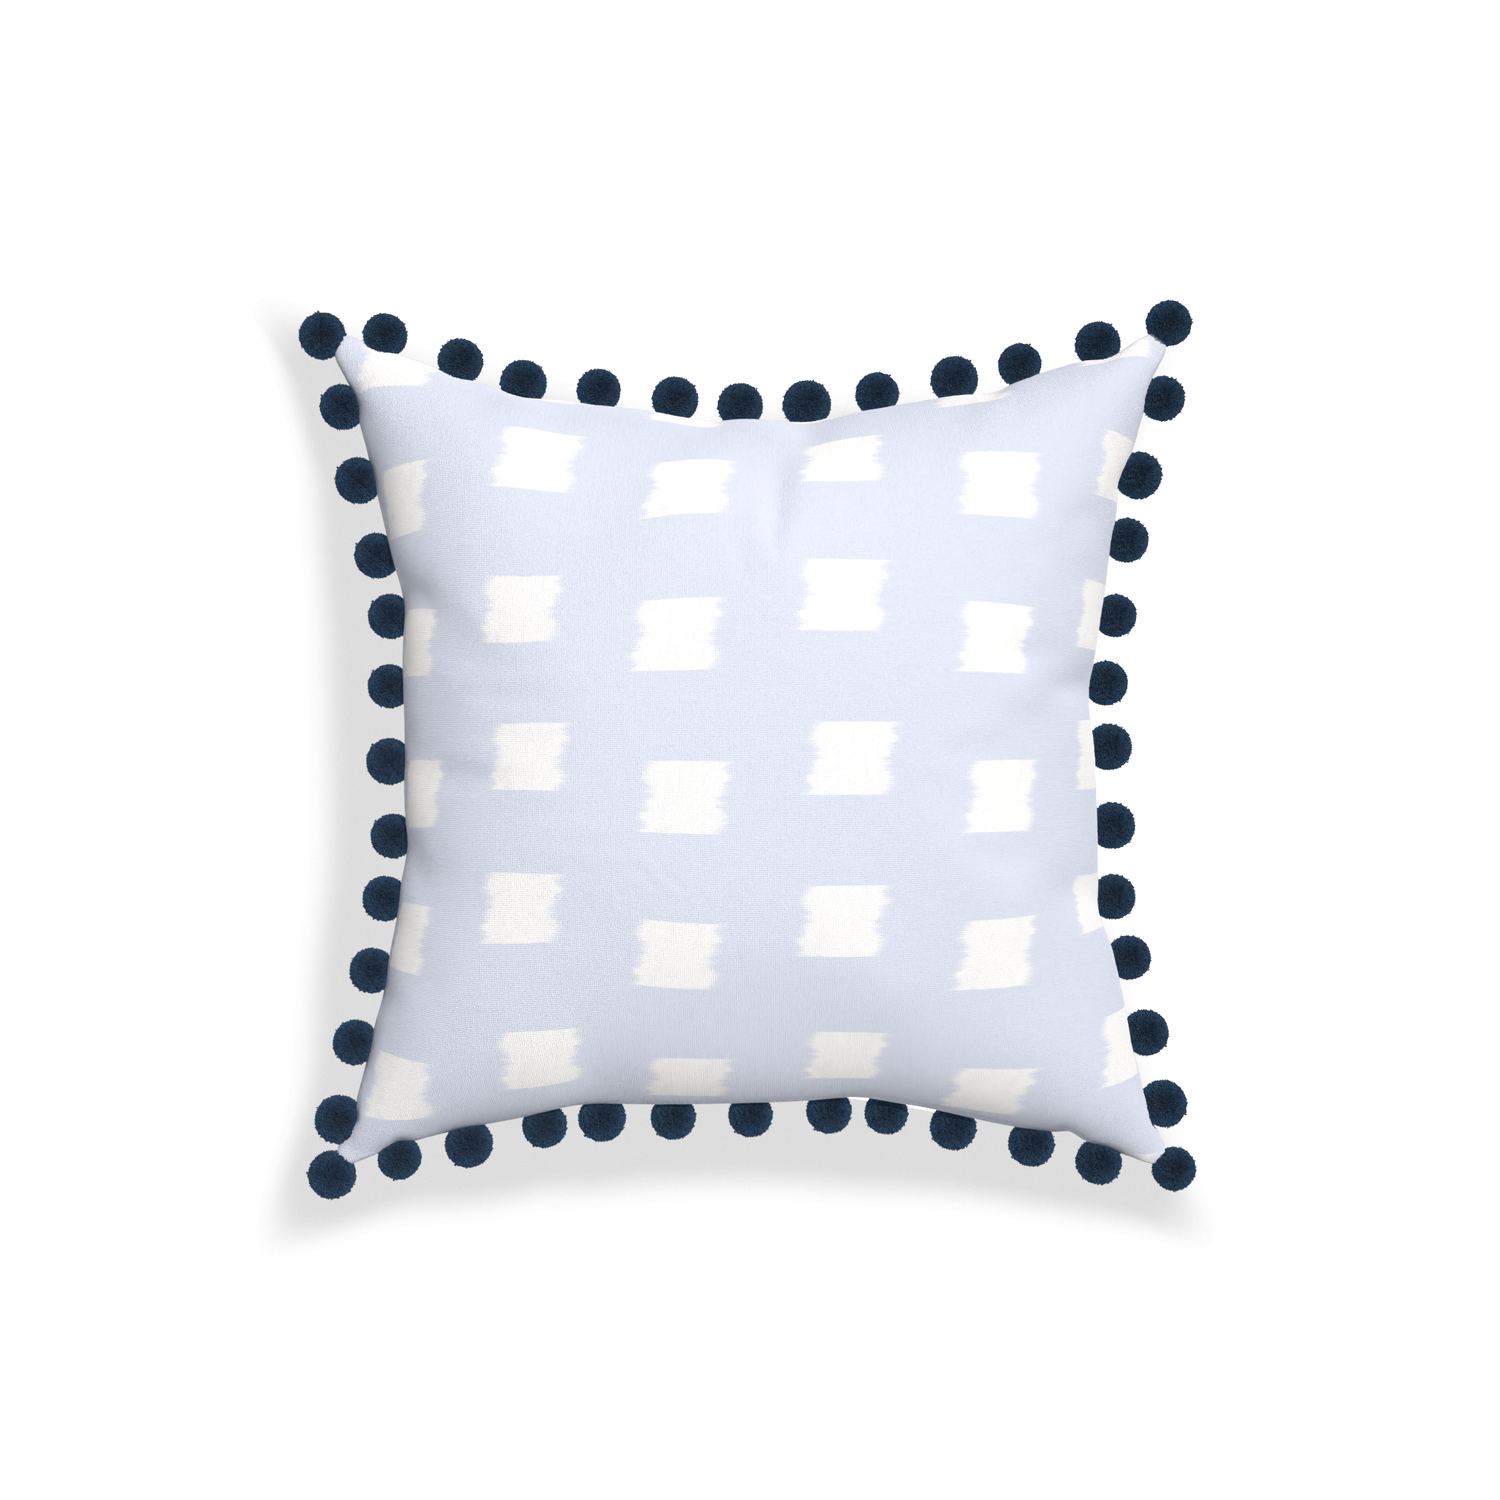 18-square denton custom sky blue patternpillow with c on white background